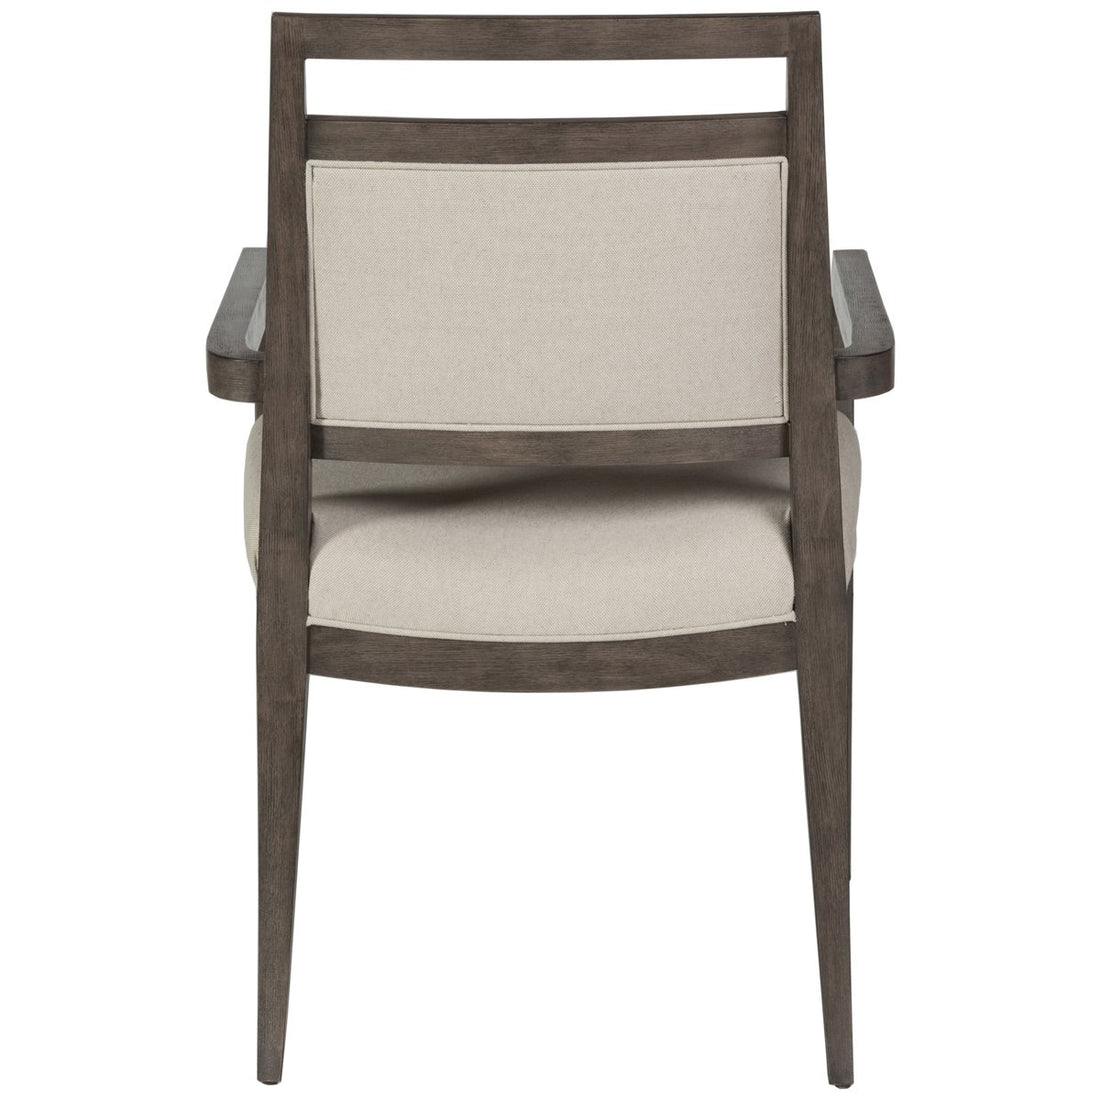 Artistica Home Nico Upholstered Arm Chair 2222-881